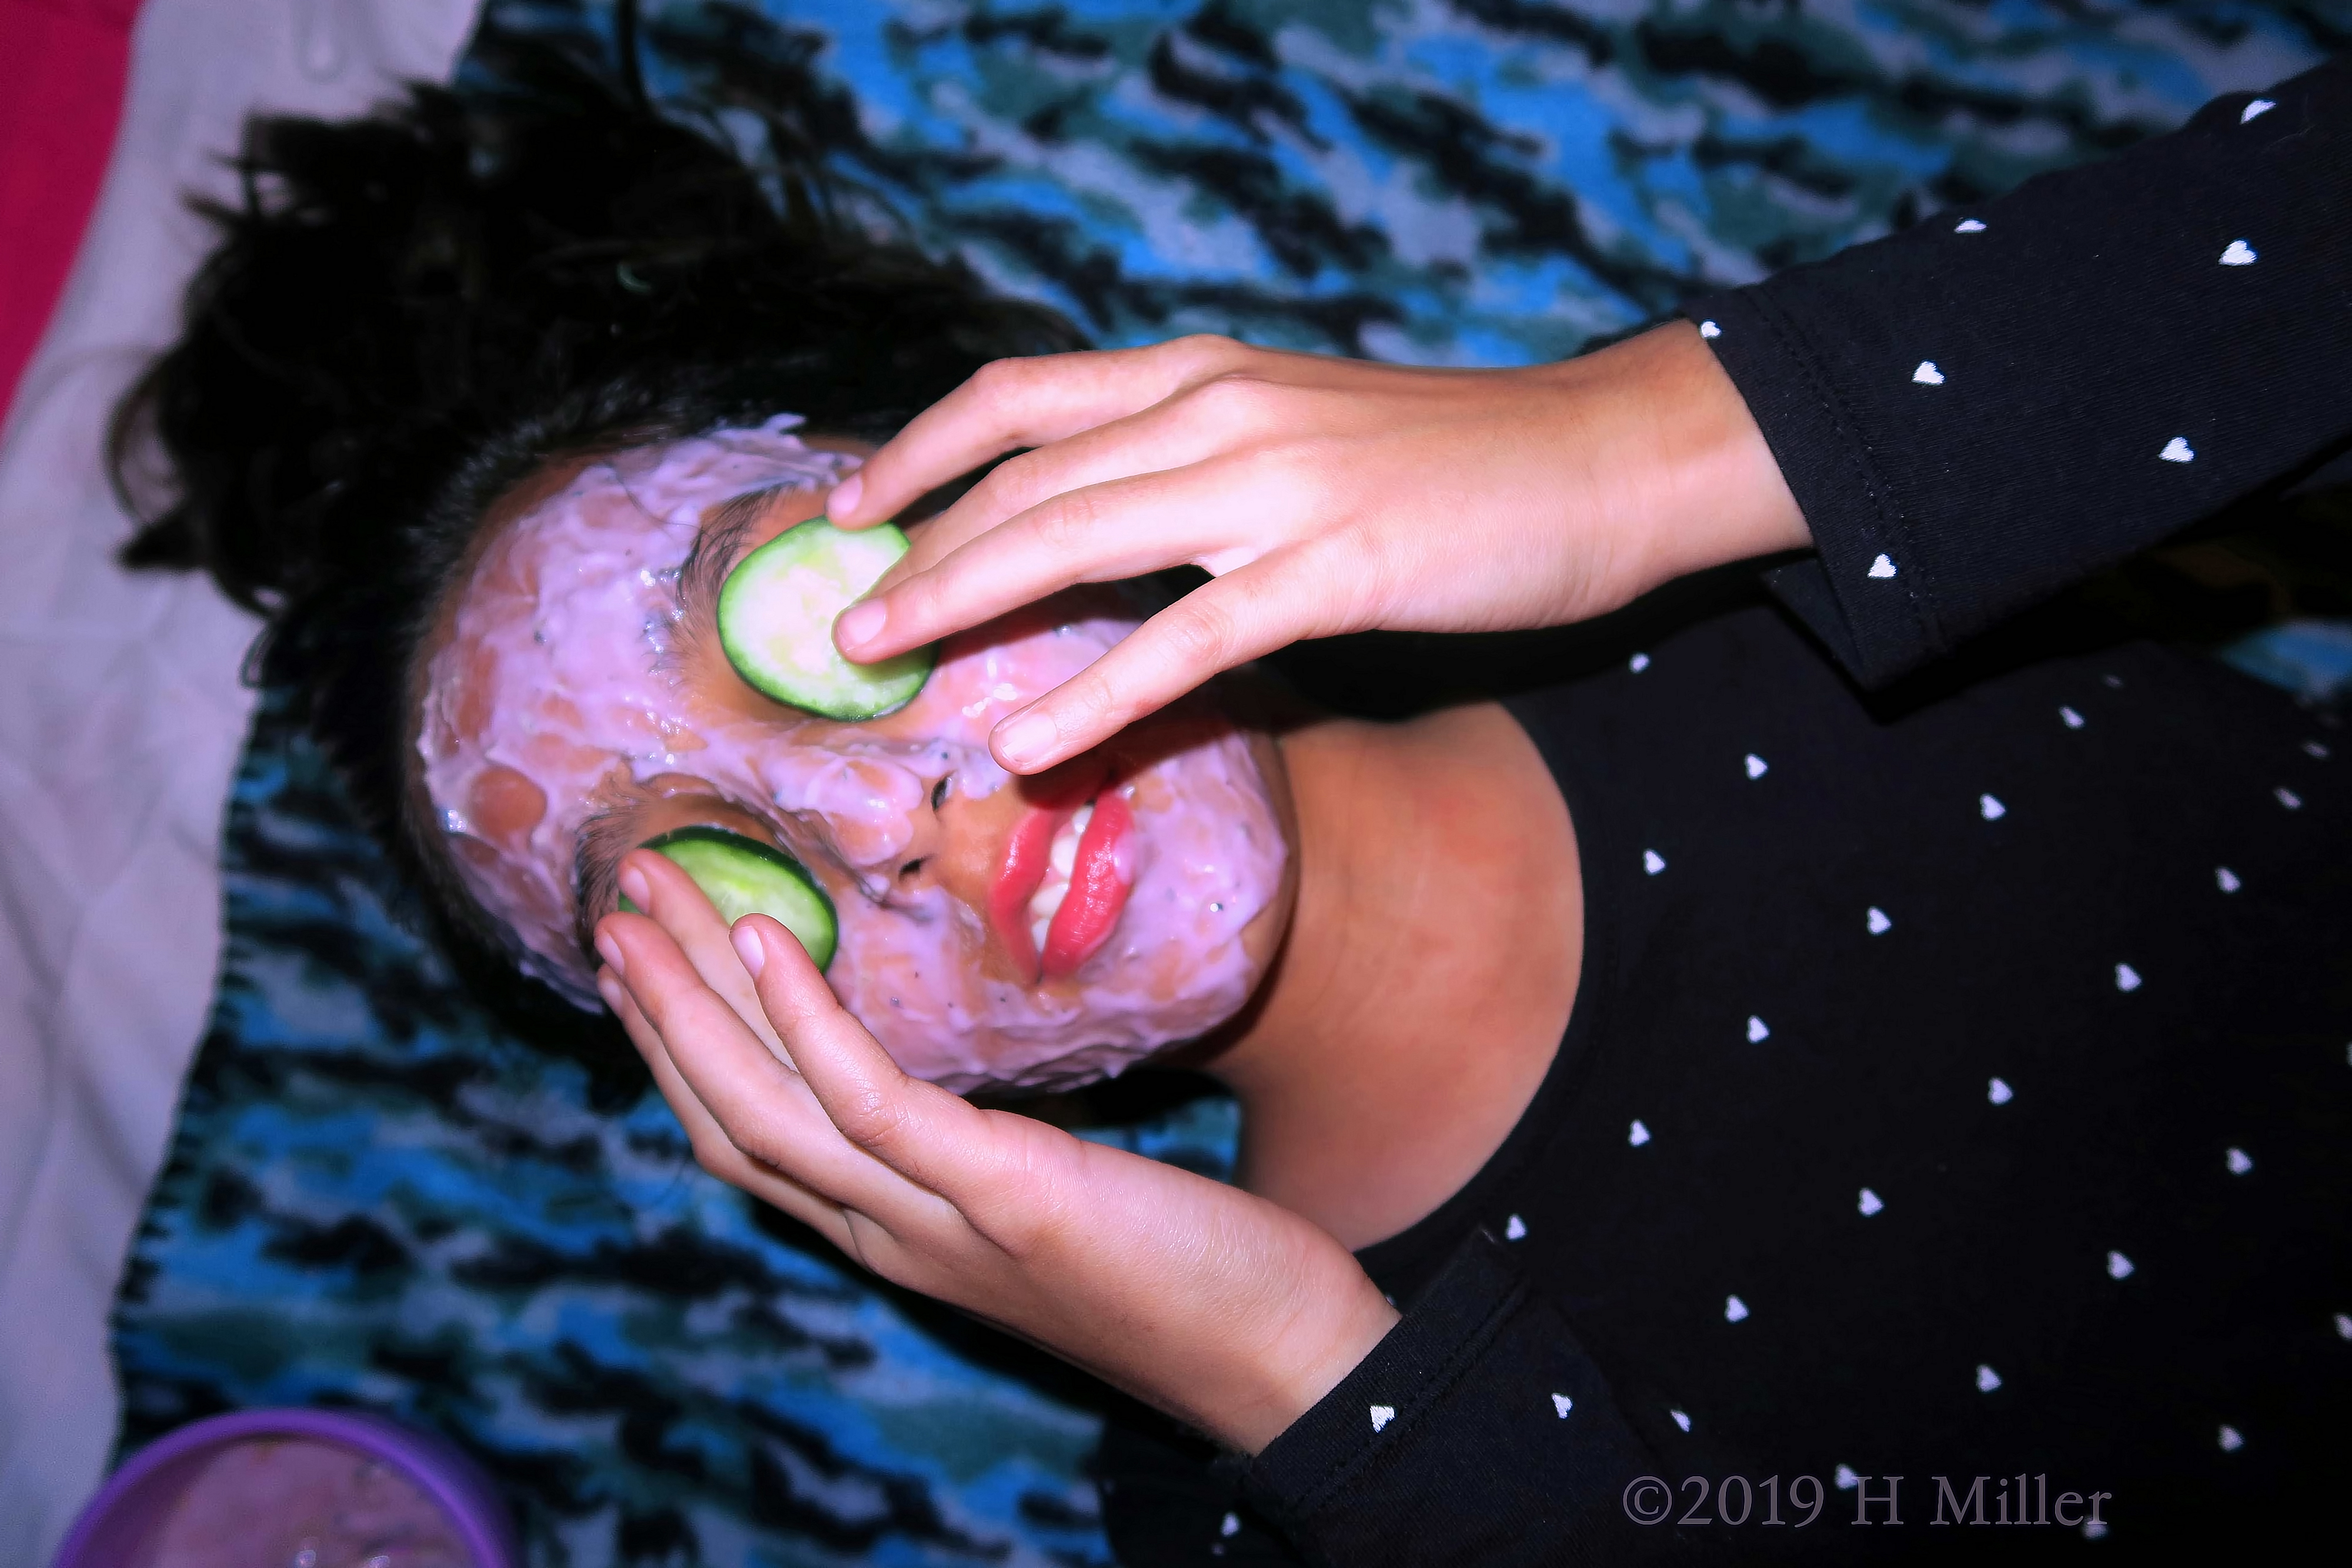 She Is Placing The Cukes In The Right Place On Her Blueberry Kids Facial Masque! 